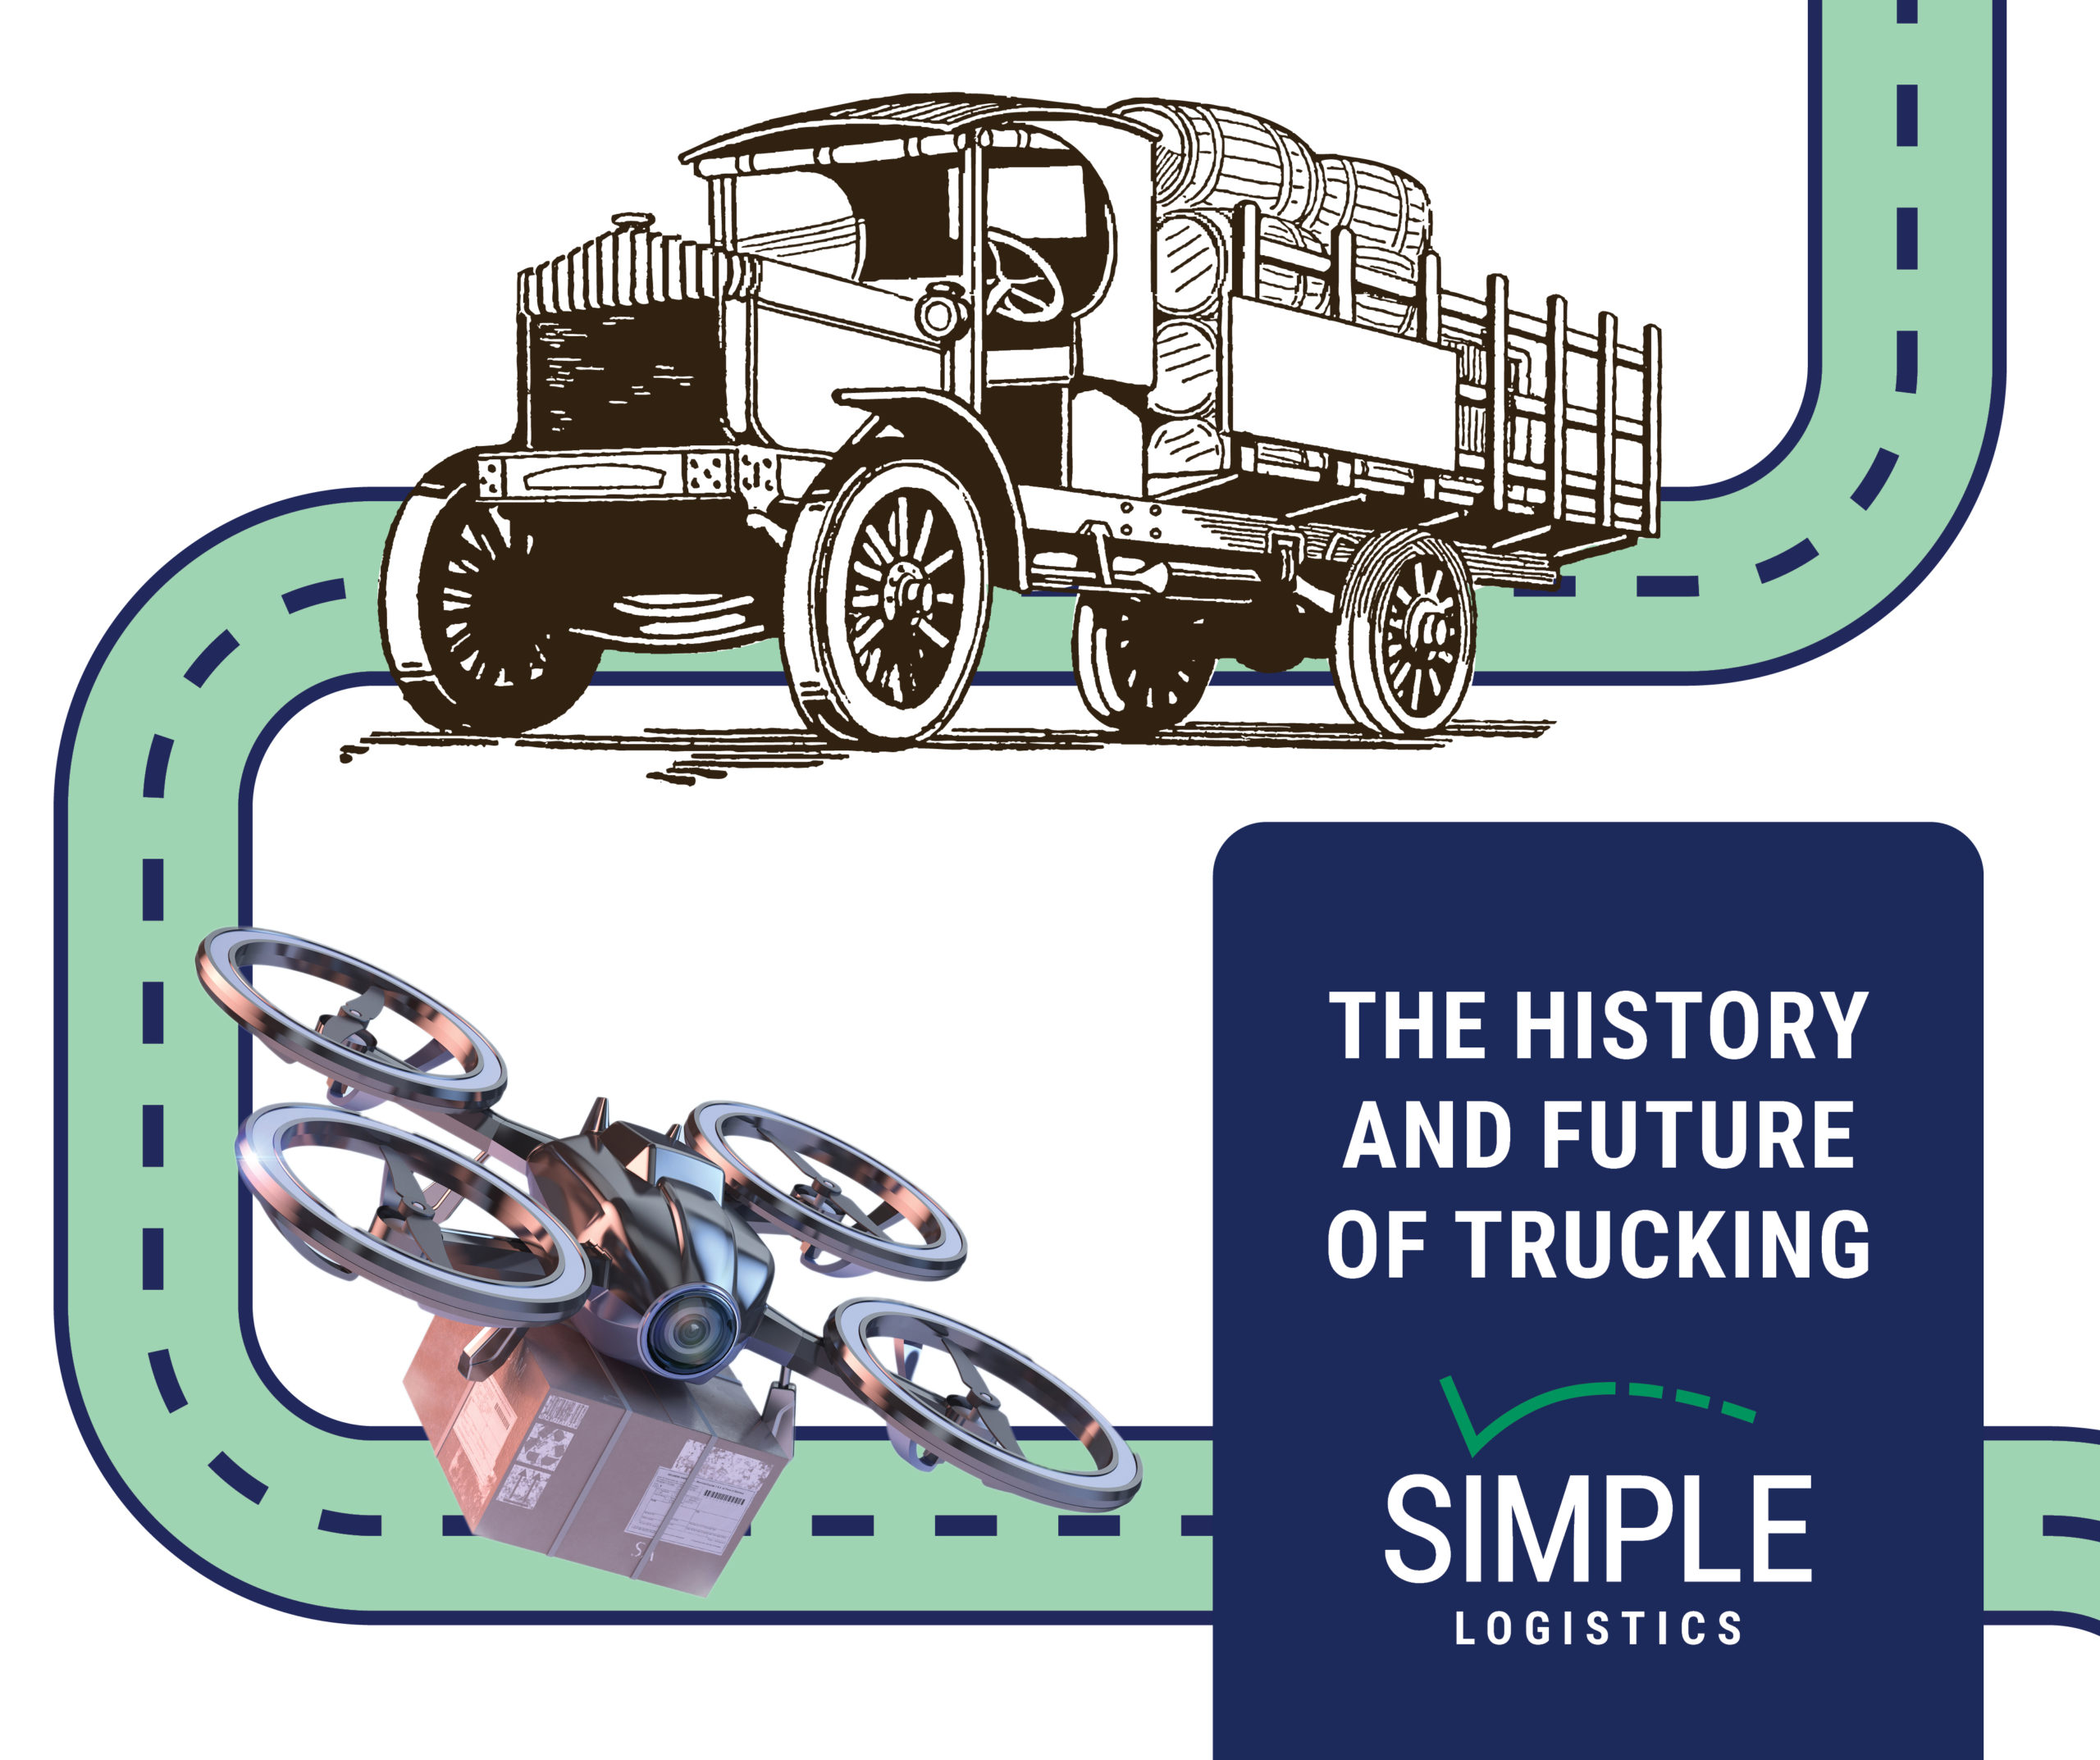 The History and Future of Trucking